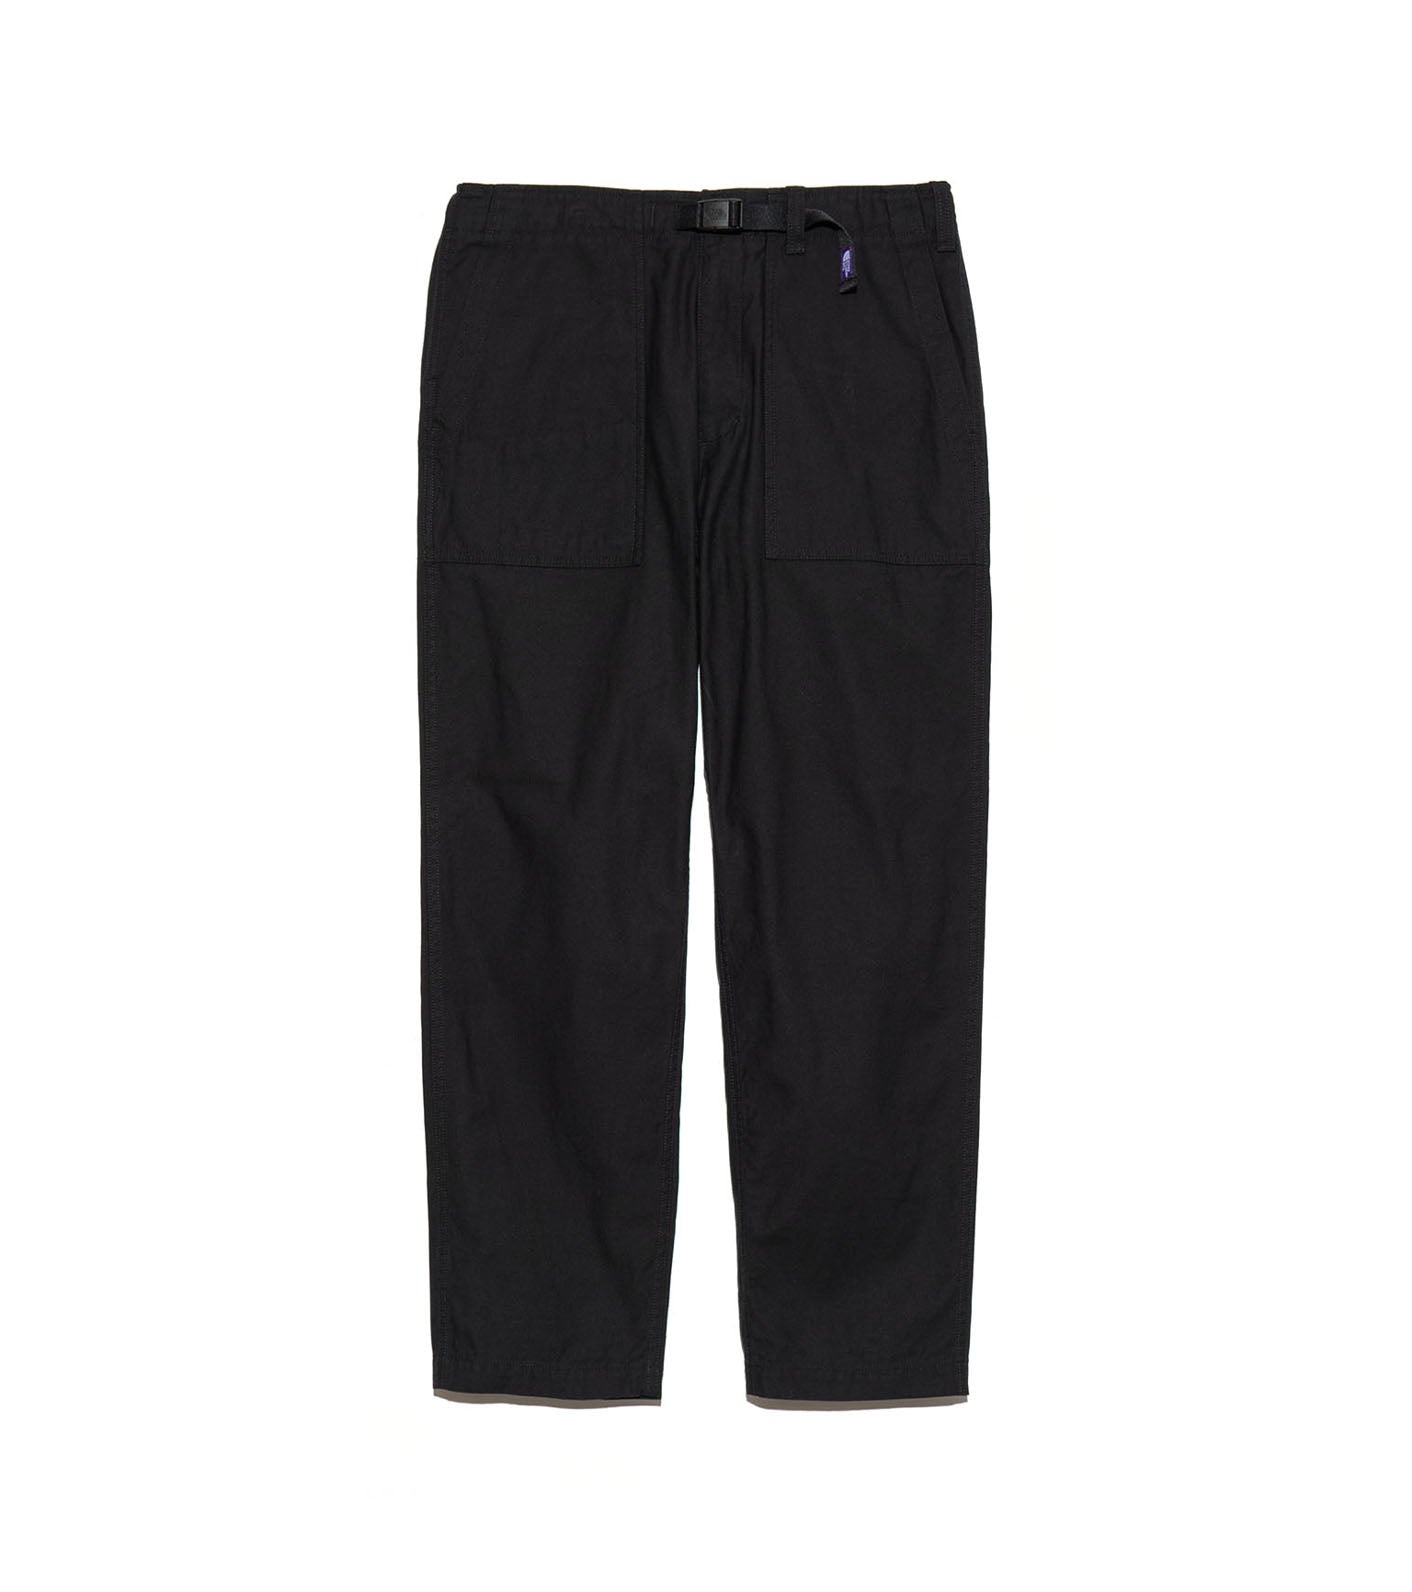 THE NORTH FACE PURPLE LABEL Field Baker Pants